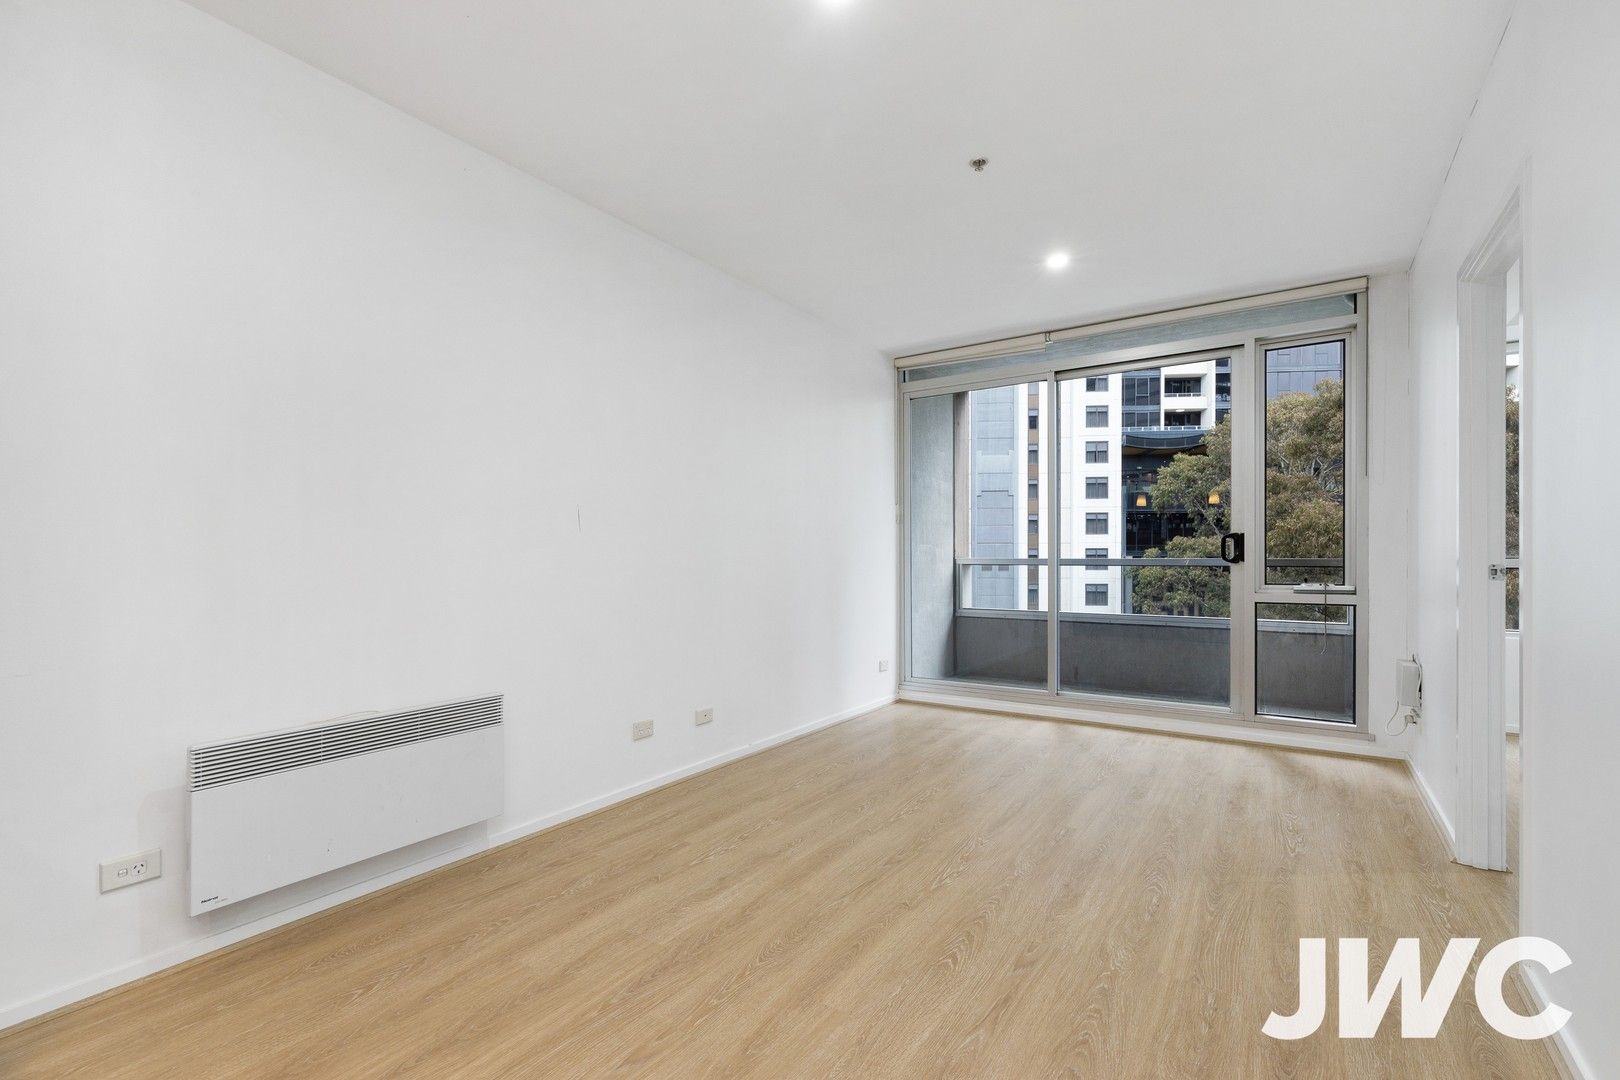 2 bedrooms Apartment / Unit / Flat in 404/1 Bouverie Street CARLTON VIC, 3053